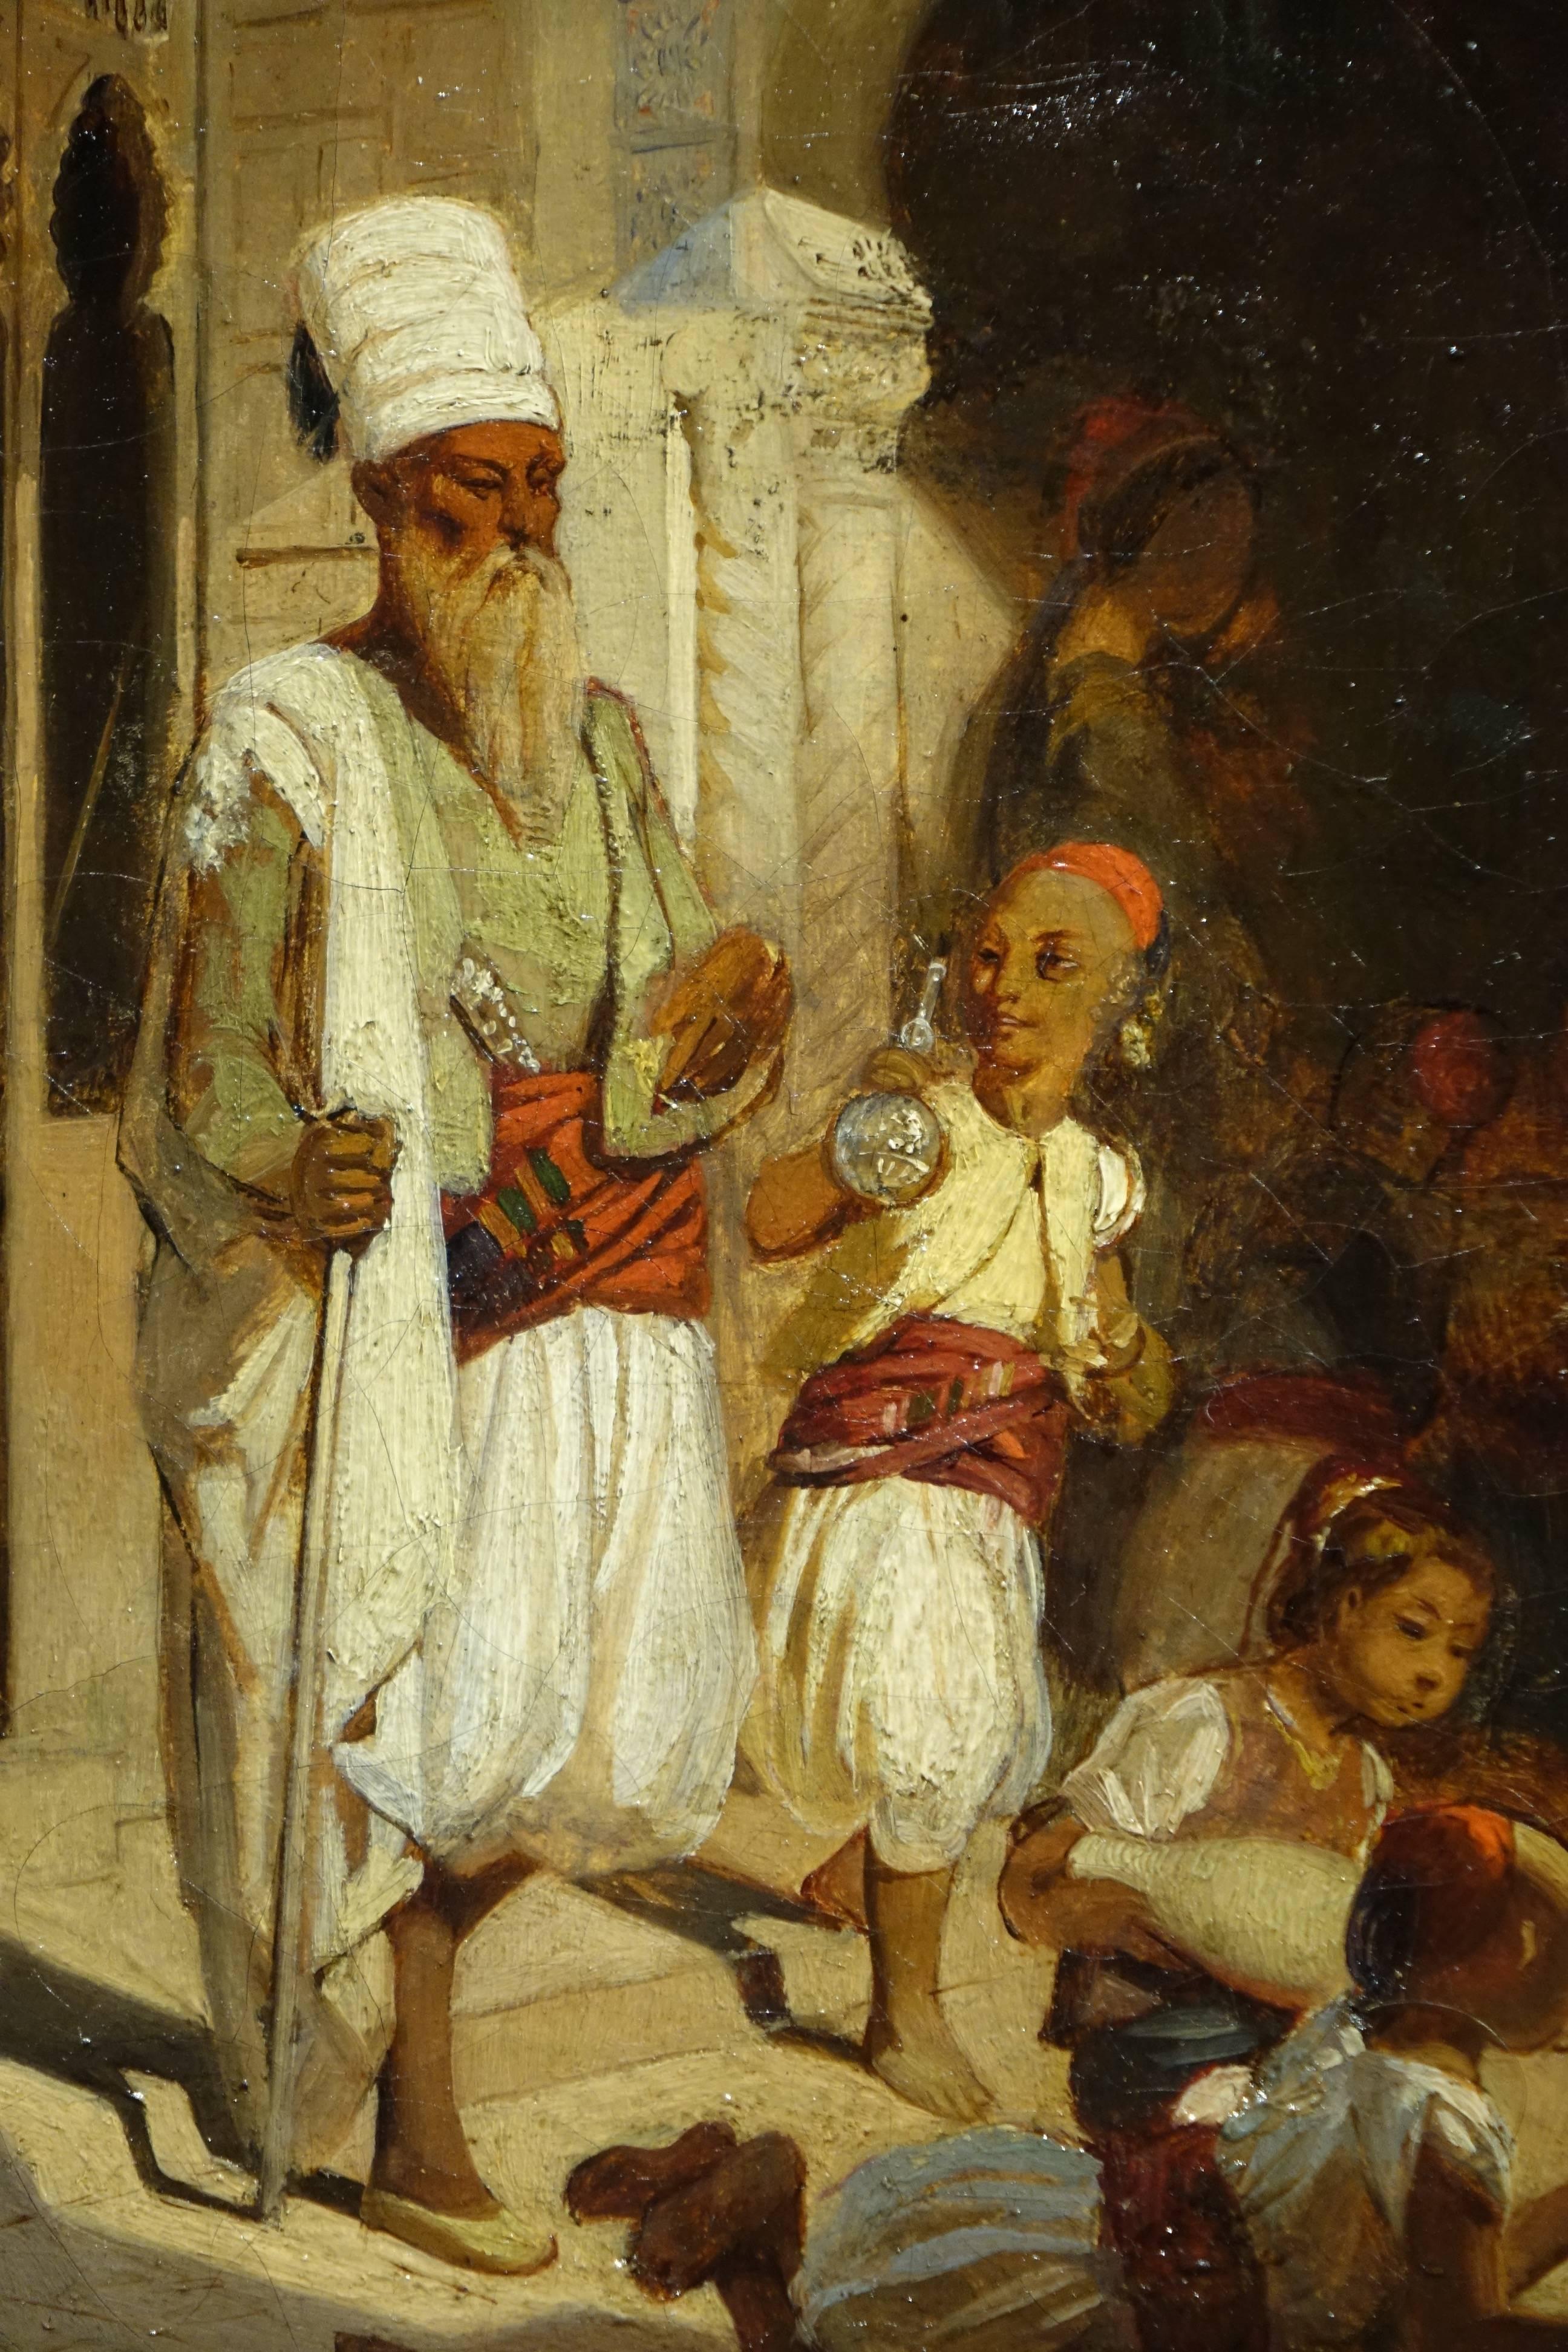  A painting depicting a Street Scene in a Souk ,Istanbul or Cairo,oil on canvas,  19th century  French  Orientalist School
Formerly attributed to Eugene Fromentin, 1820-1876.